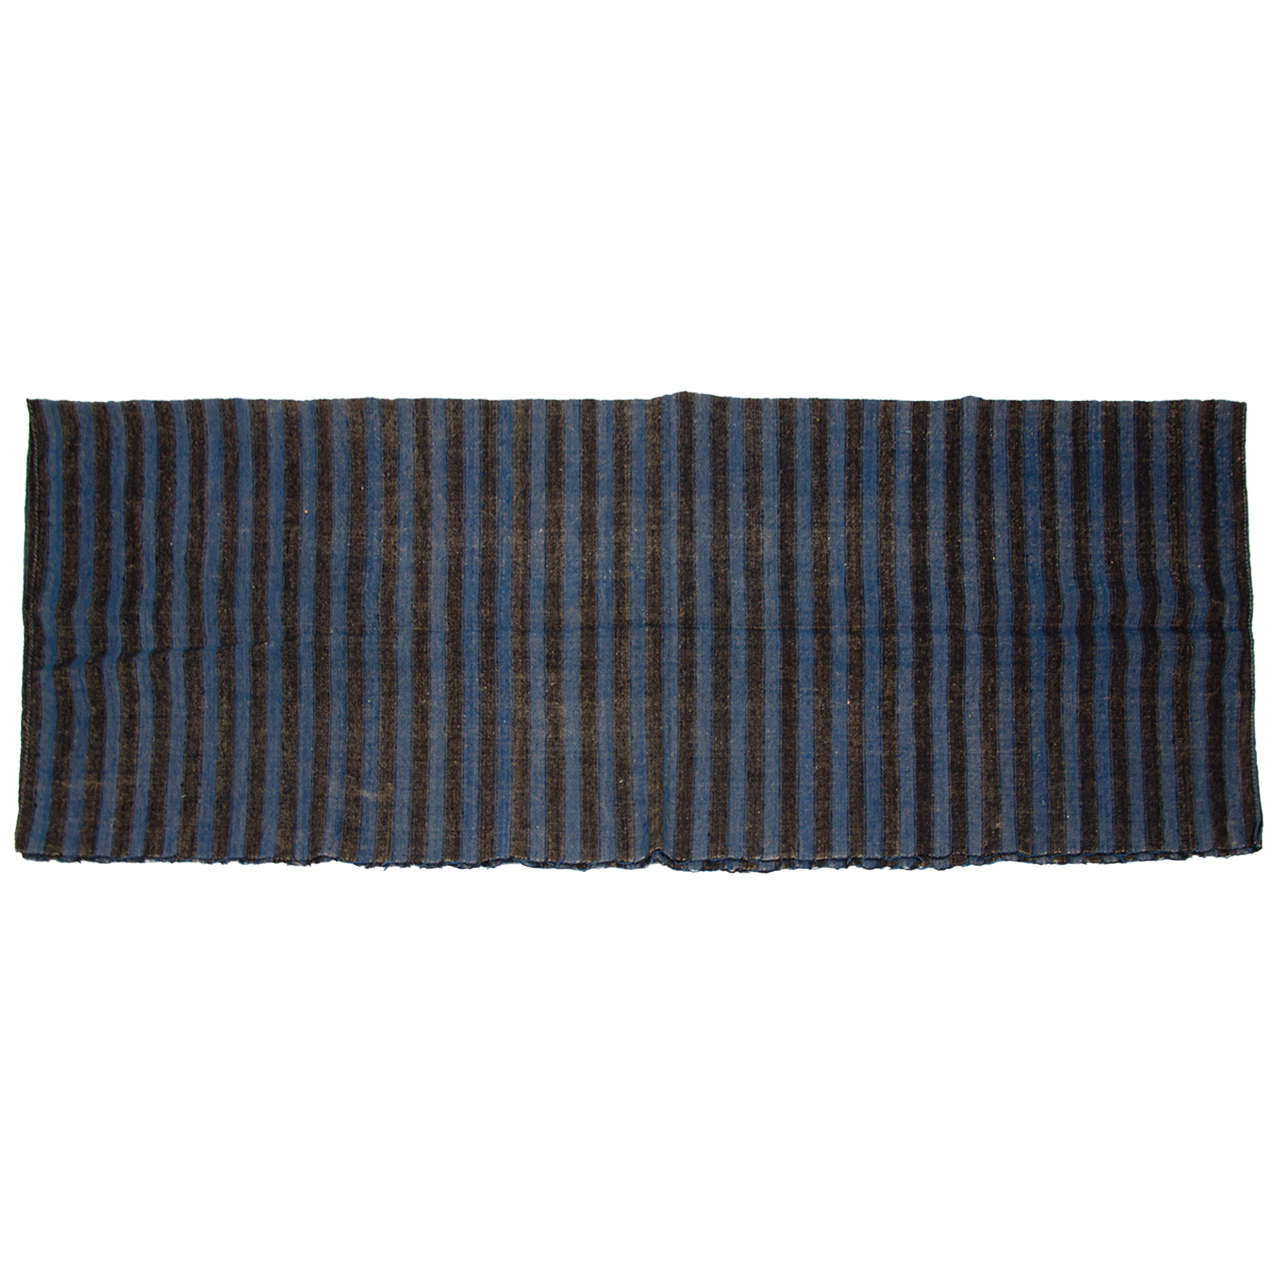 Early 19th Century Dutch striped Black & Blue Funeral Blanket For Sale